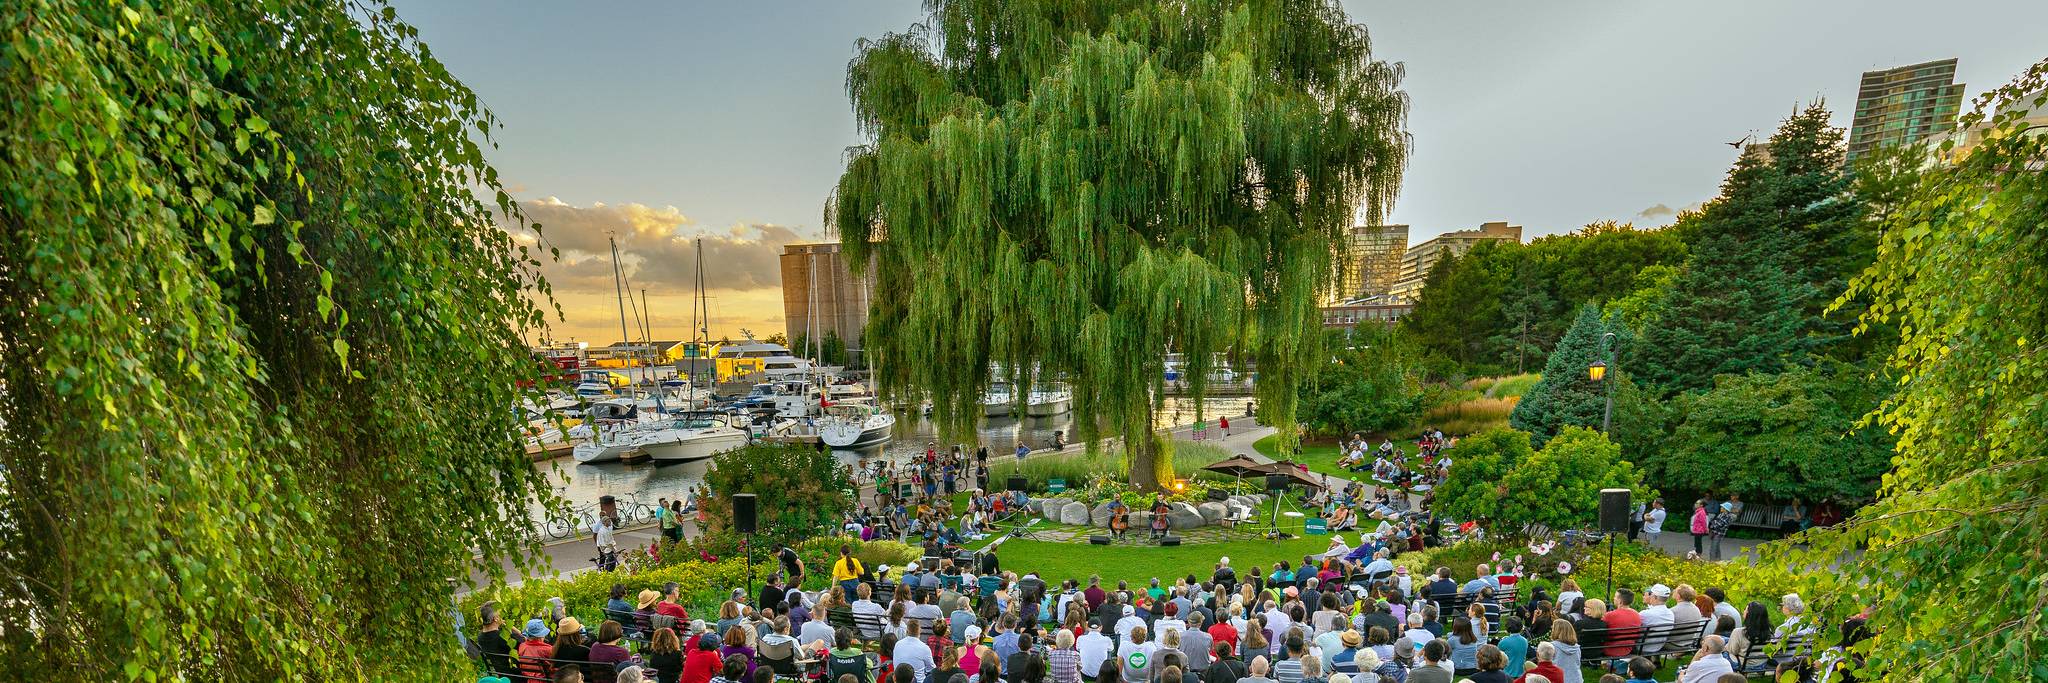 Summer Music in the Garden - Harbourfront Centre